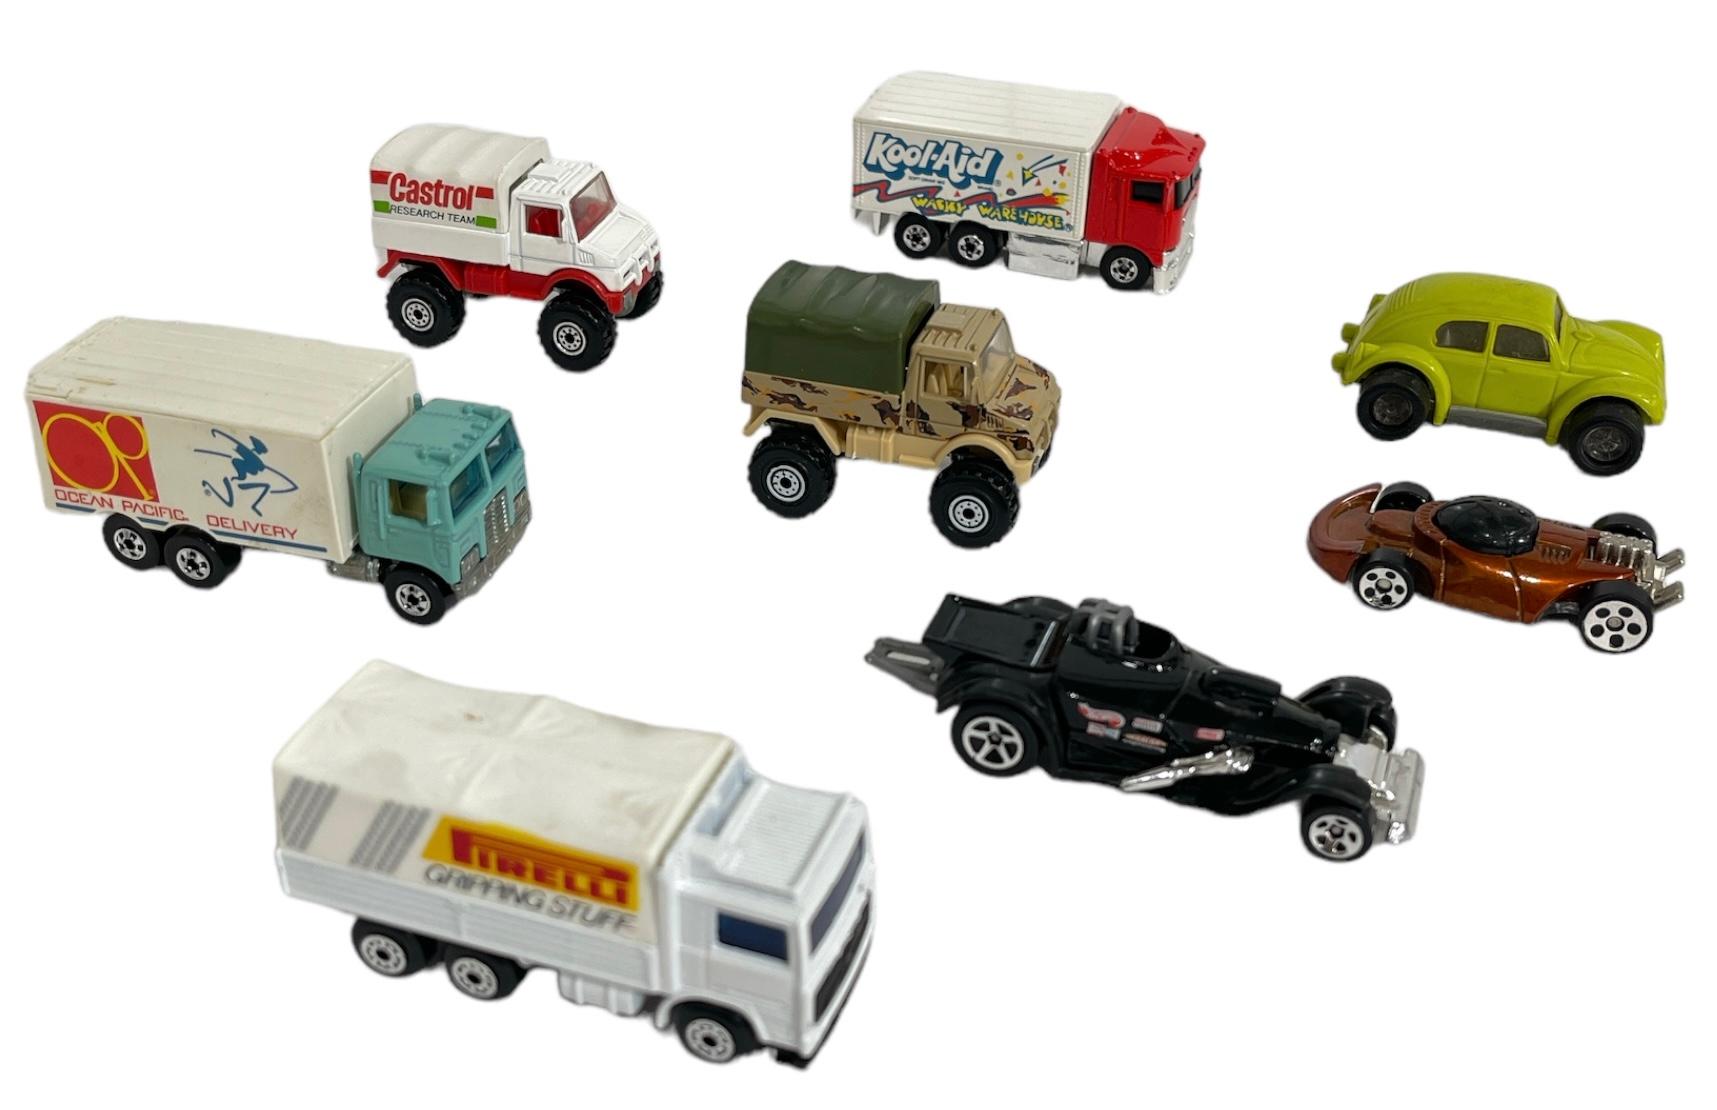 Vintage Hot Wheels Collection